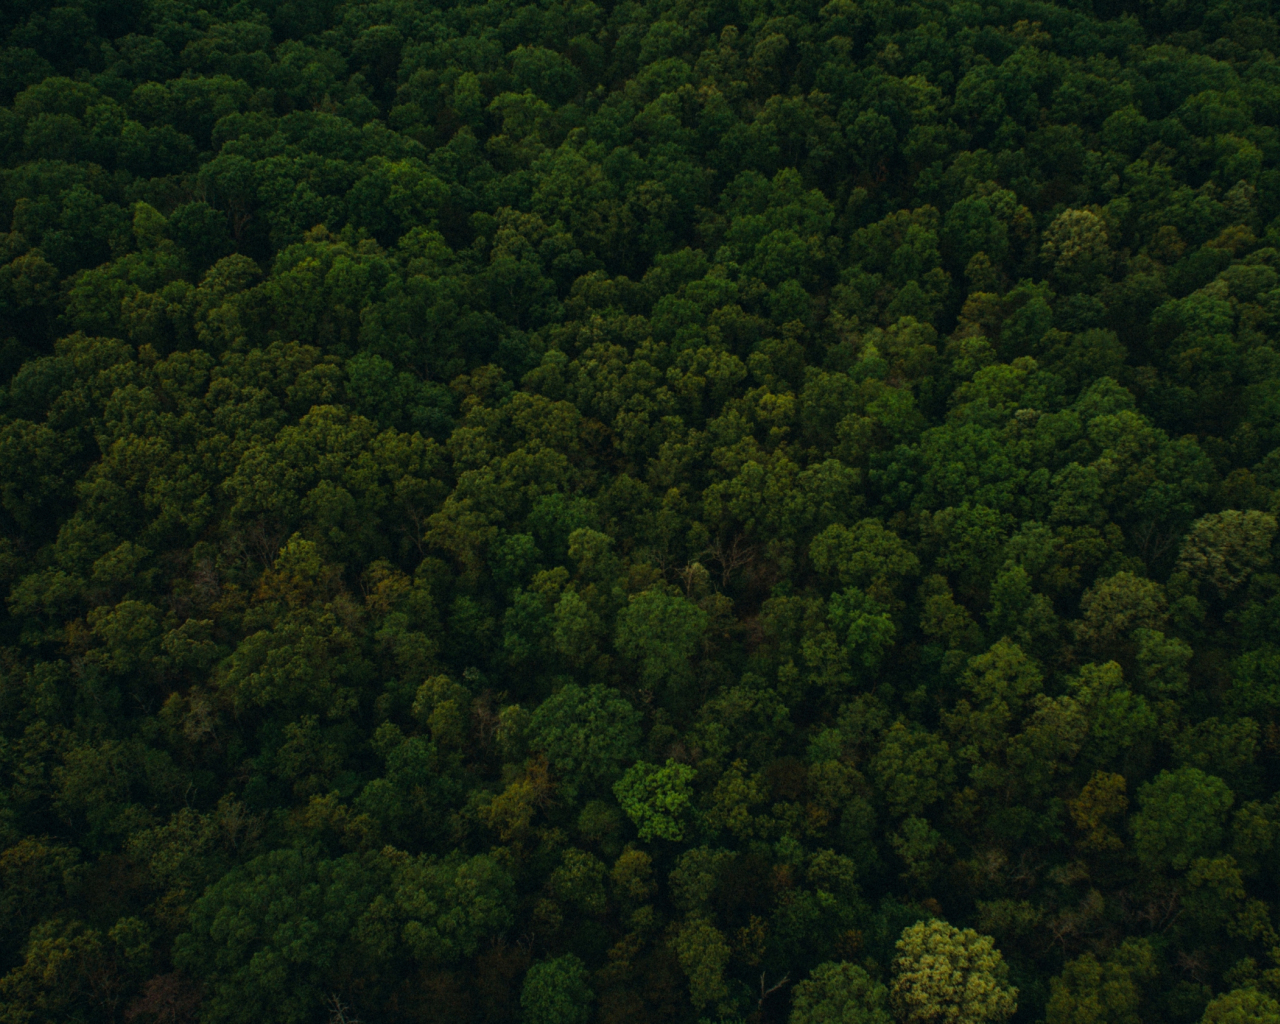 Desktop Wallpaper Trees, Top View, Green Forest, Nature, HD Image, Picture, Background, Fppwxg